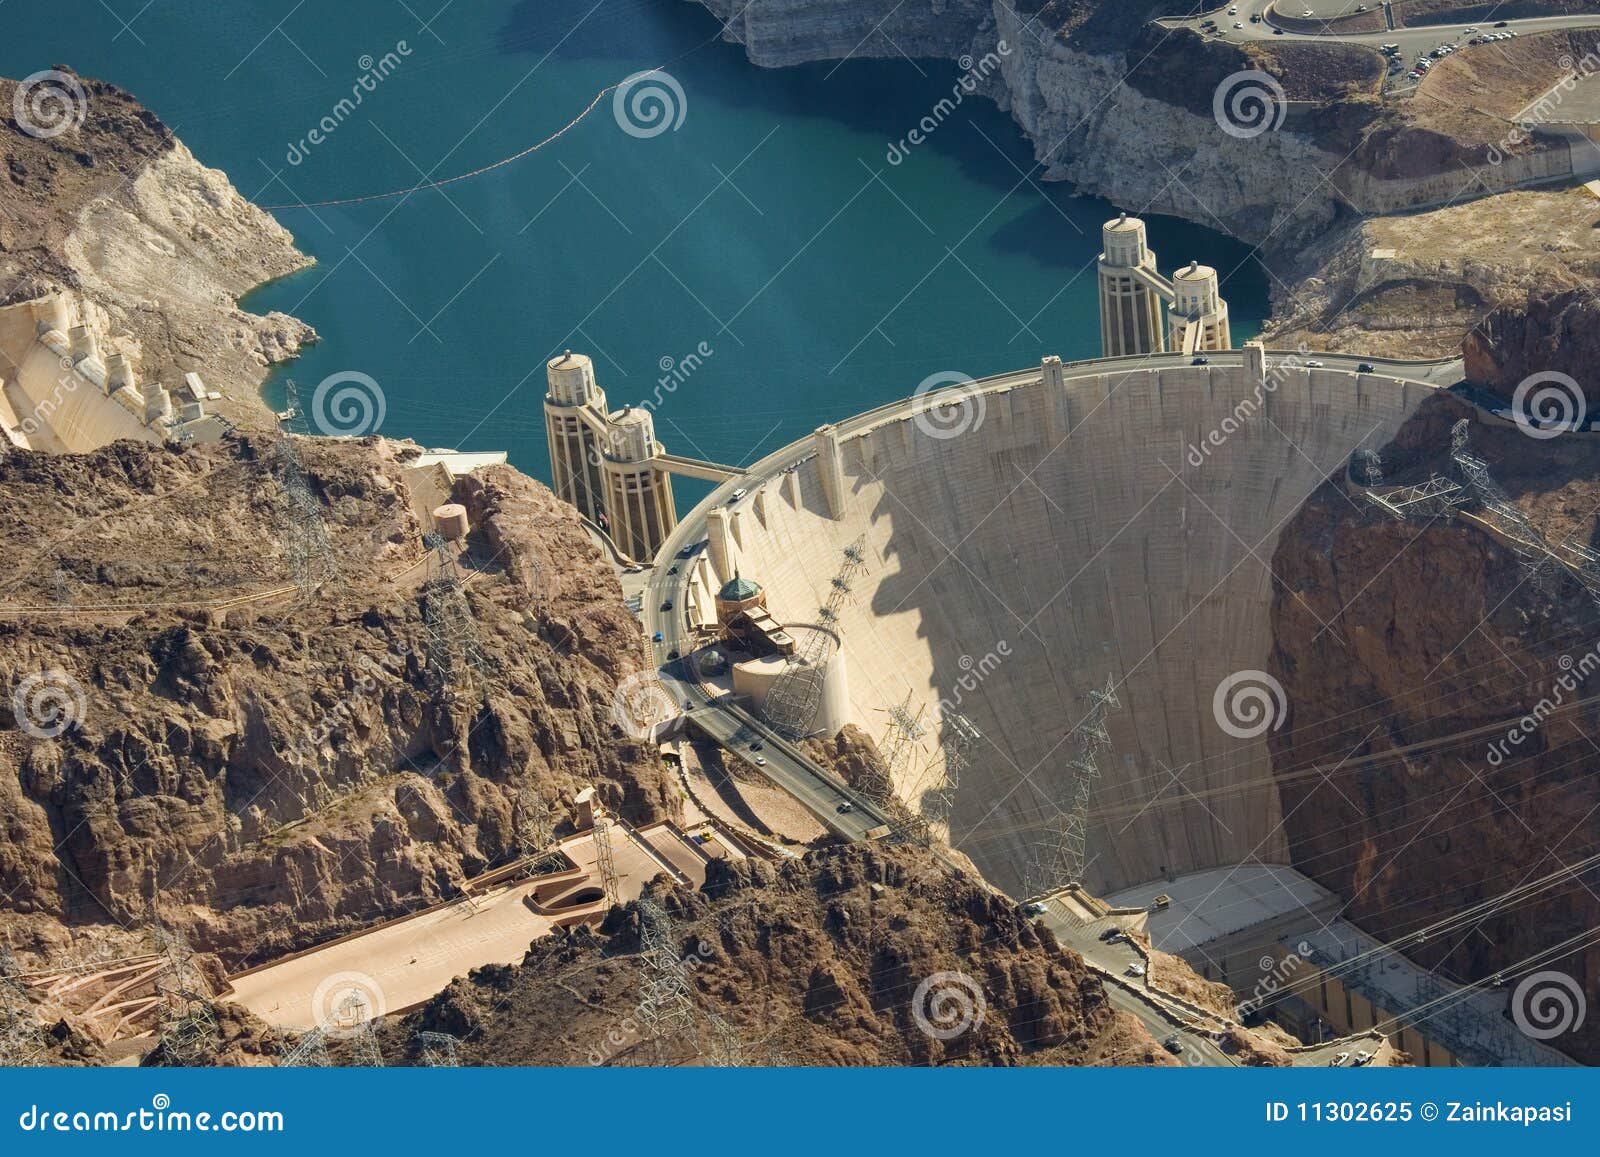 the hoover dam and lake mead